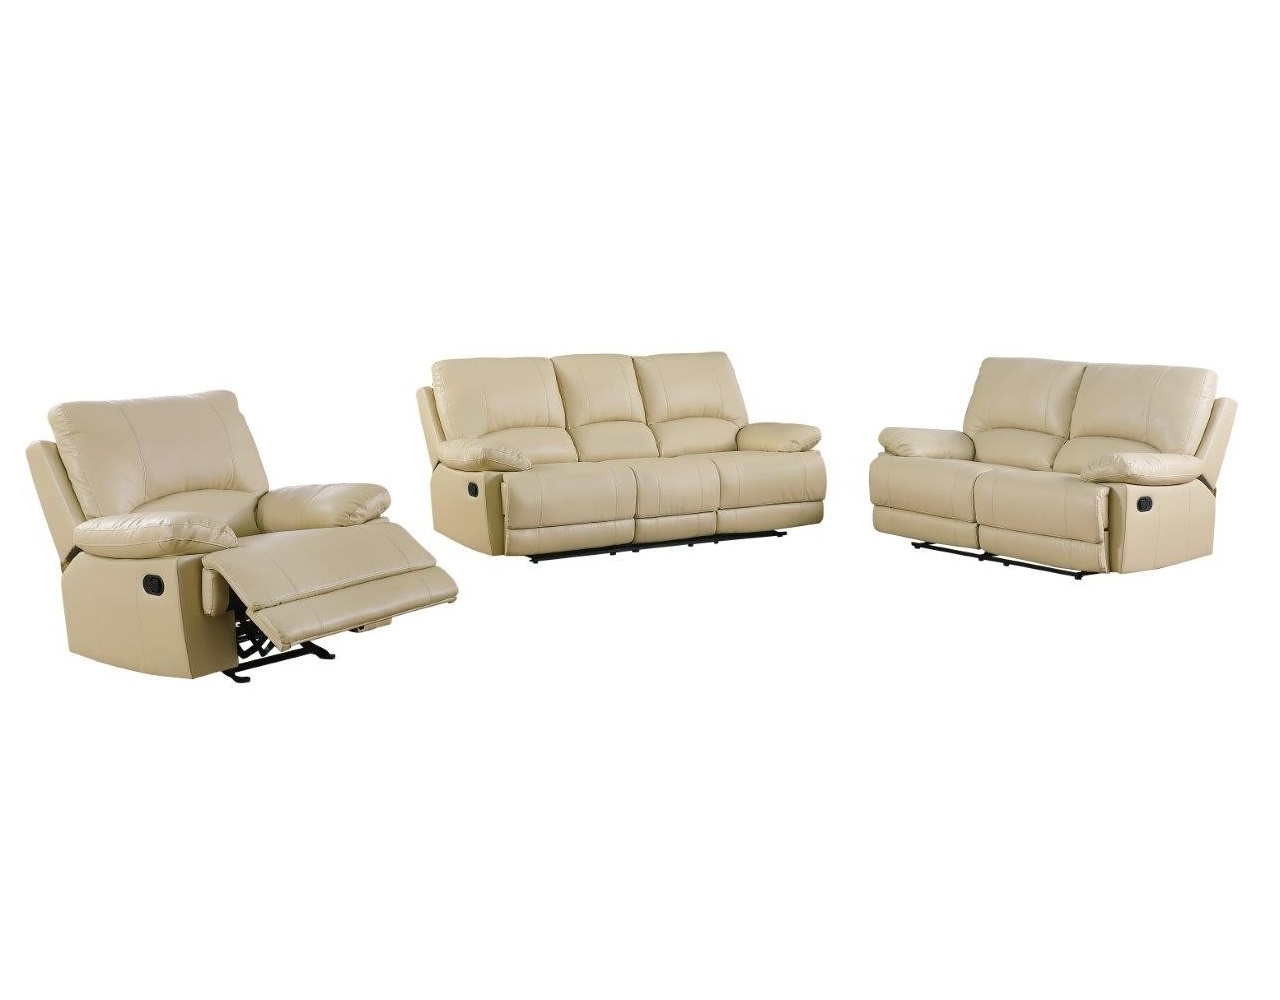 Three Piece Indoor Beige Faux Leather Six Person Seating Set-329411-1